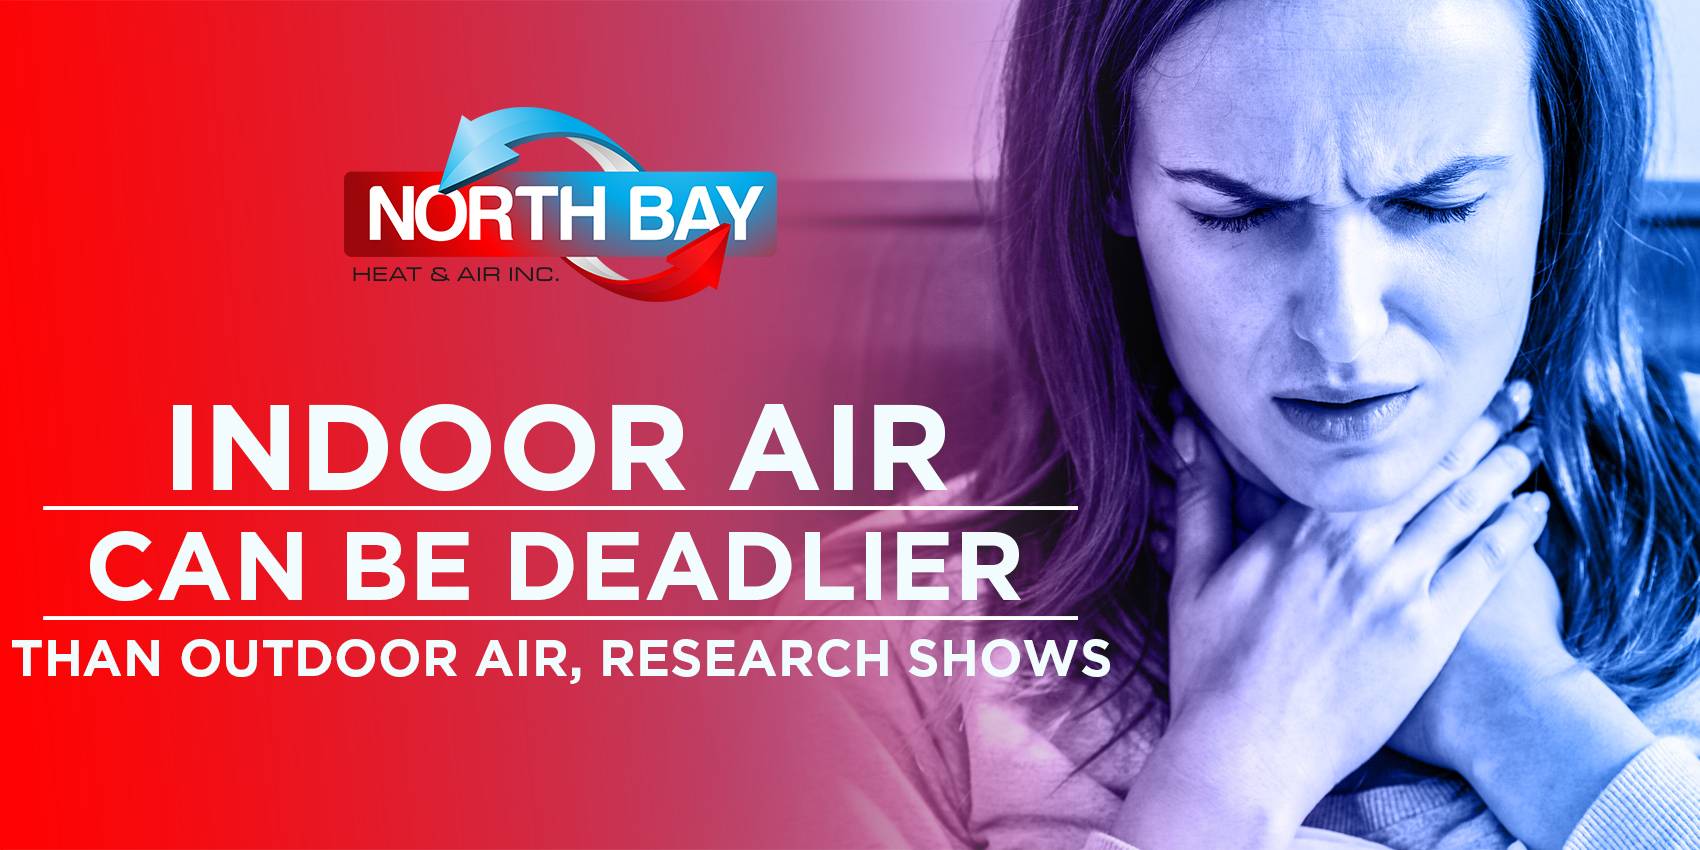 Indoor Air Can Be Deadlier Than Outdoor Air, Research Shows